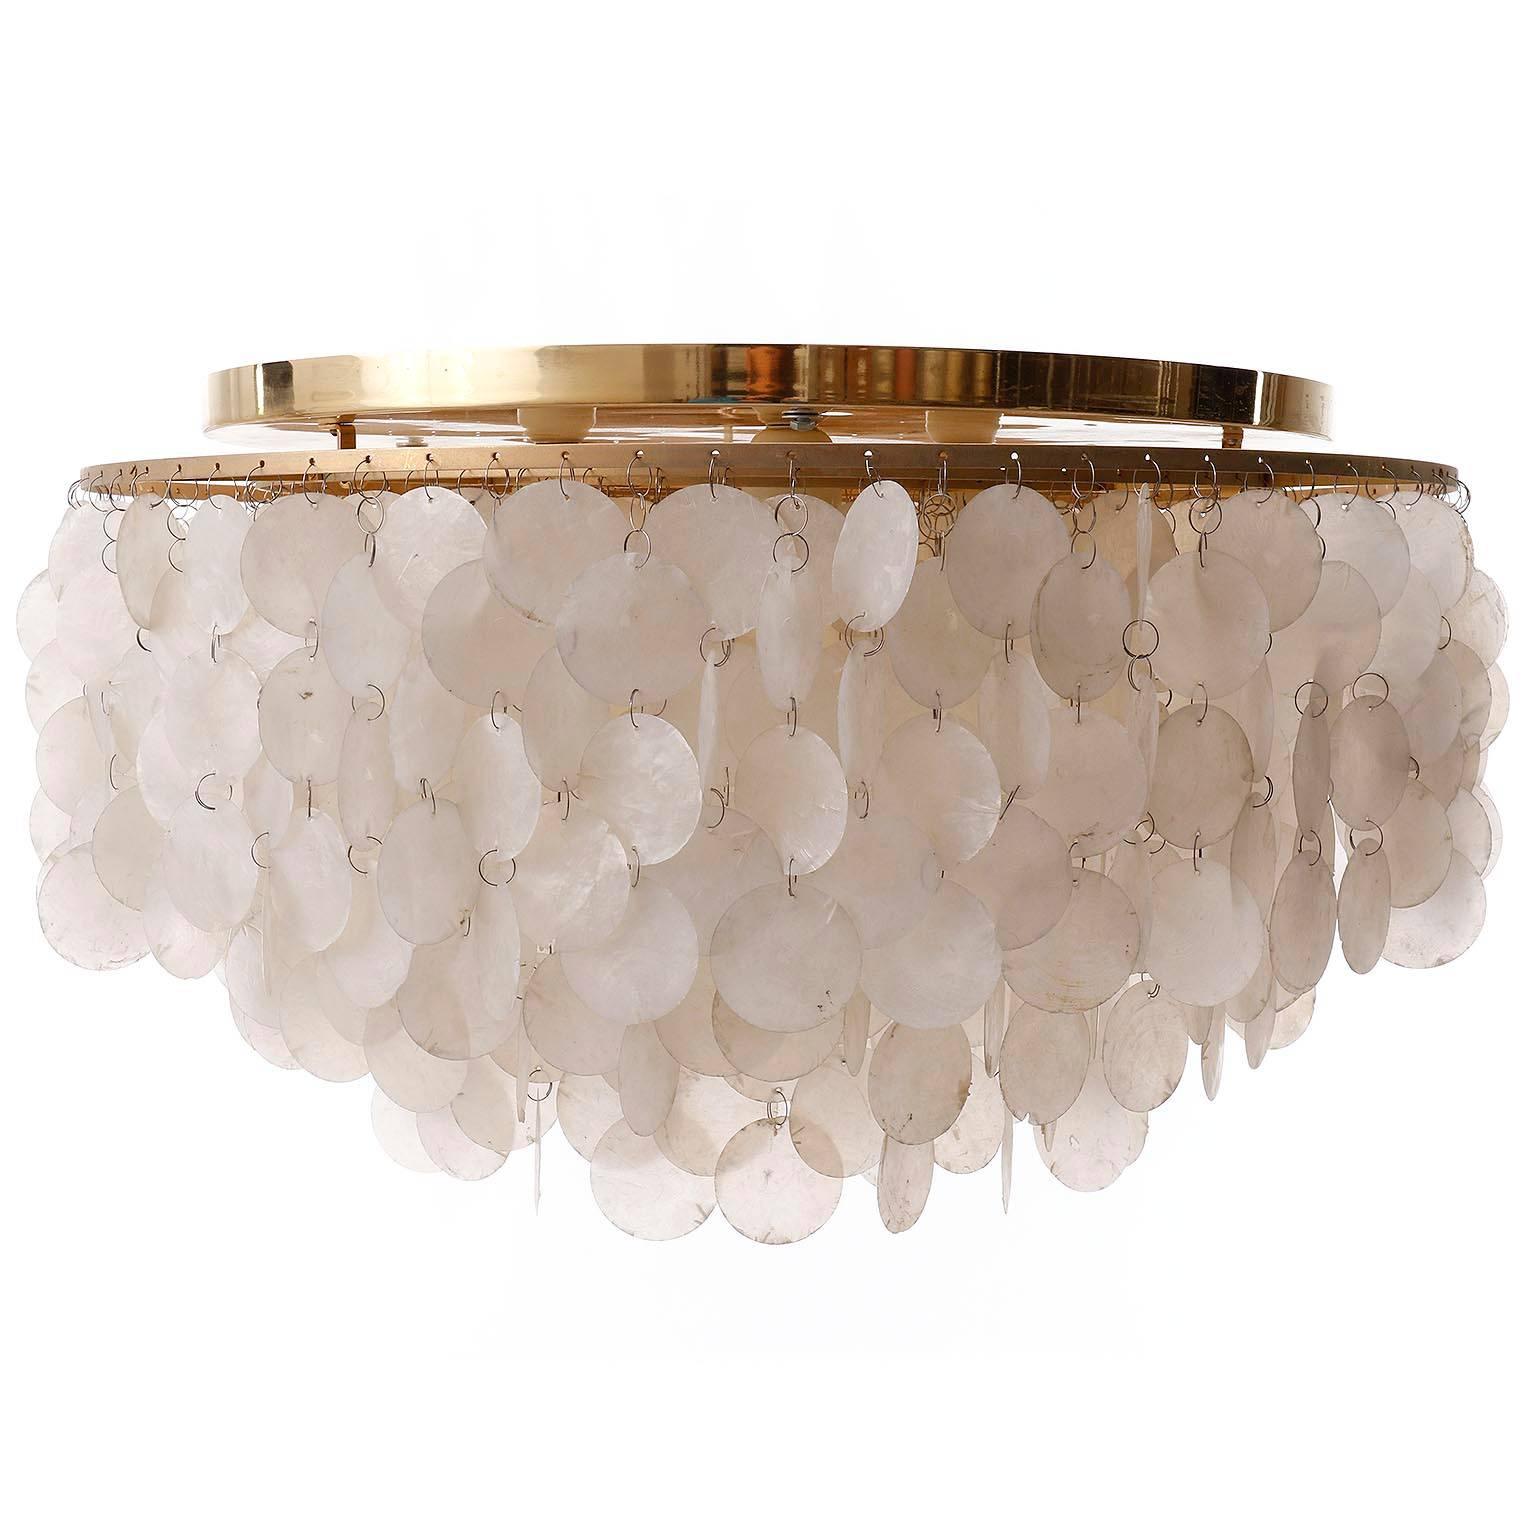 A large four-tier sea shell flush mount light fixture designed by Verner Panton for the Swiss manufacturer J. Luber Ag. An original vintage piece manufactured in Mid-Century (1960s-1970s).
Hundreds of sea shells are hanging on four rings of brass.